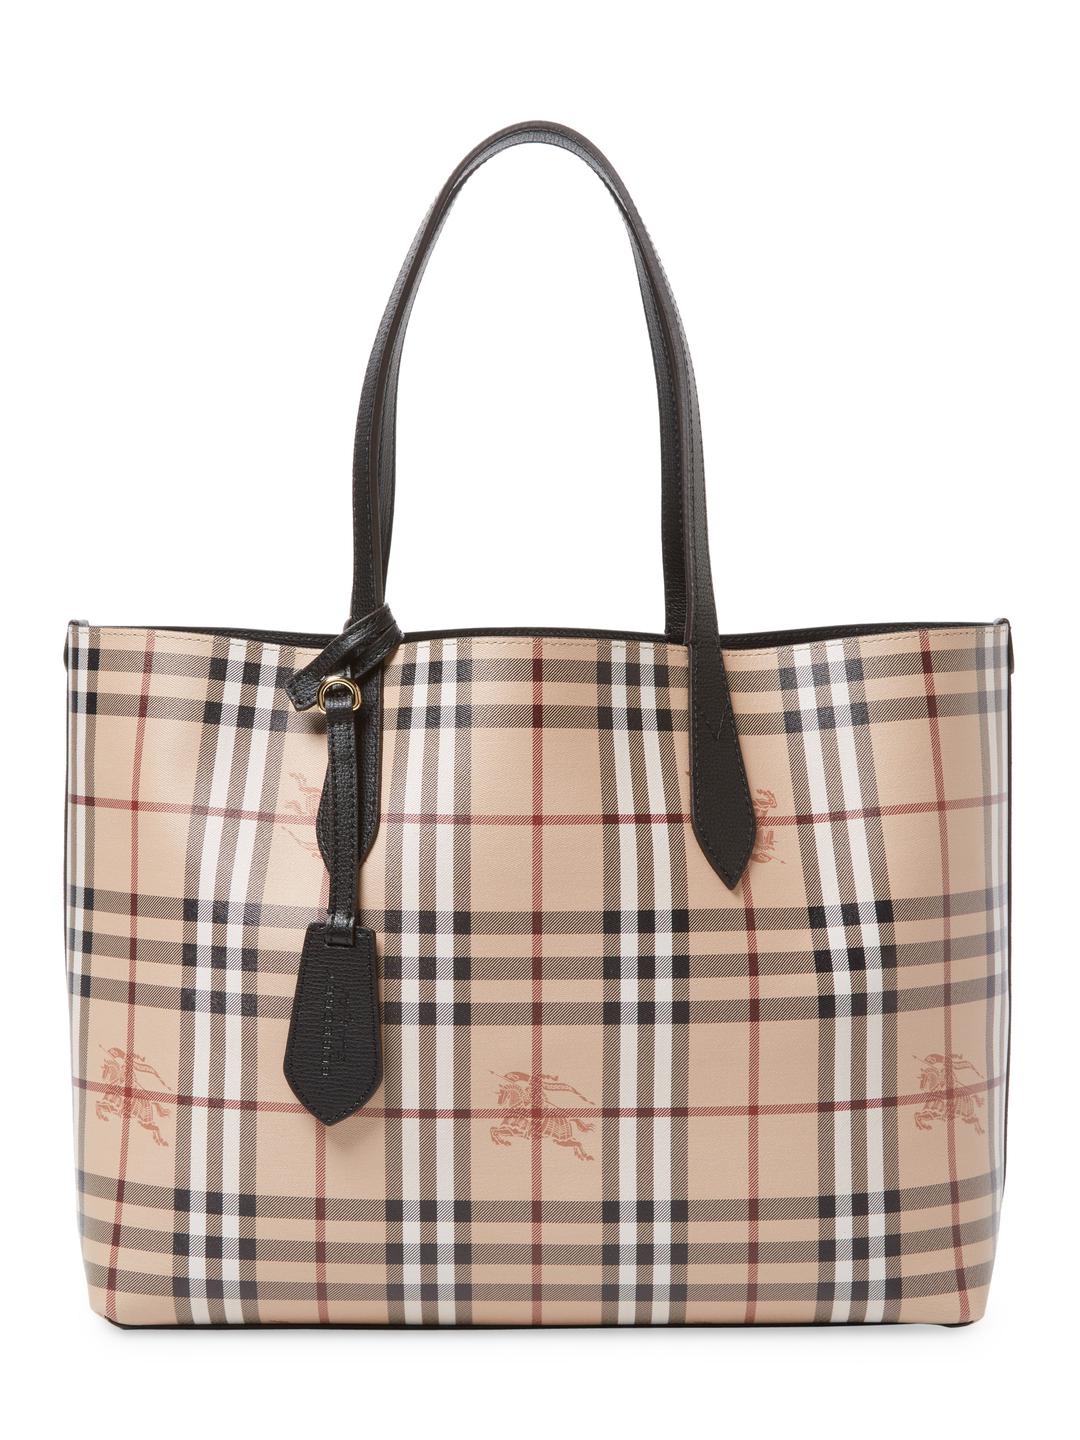 Burberry Leather Plaid Tote Bag in Black - Lyst